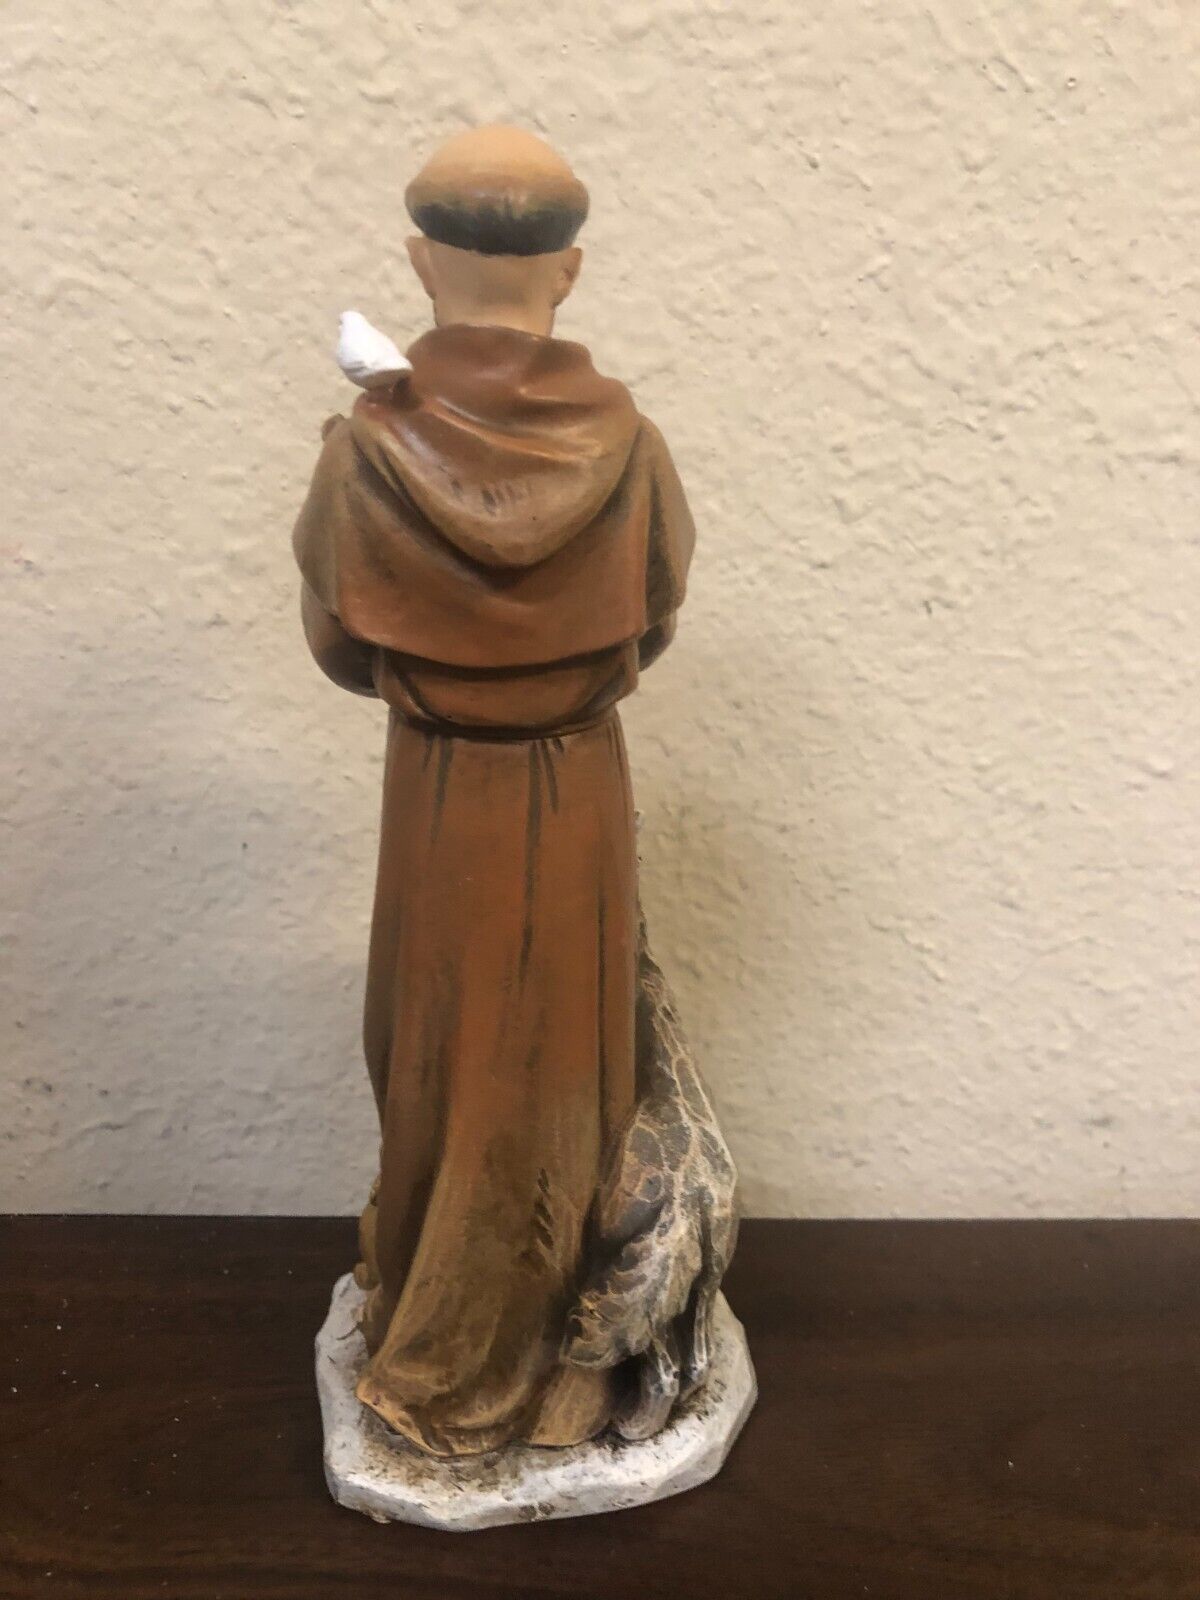 Padre Pio 8 " Statue, New from Colombia - Bob and Penny Lord